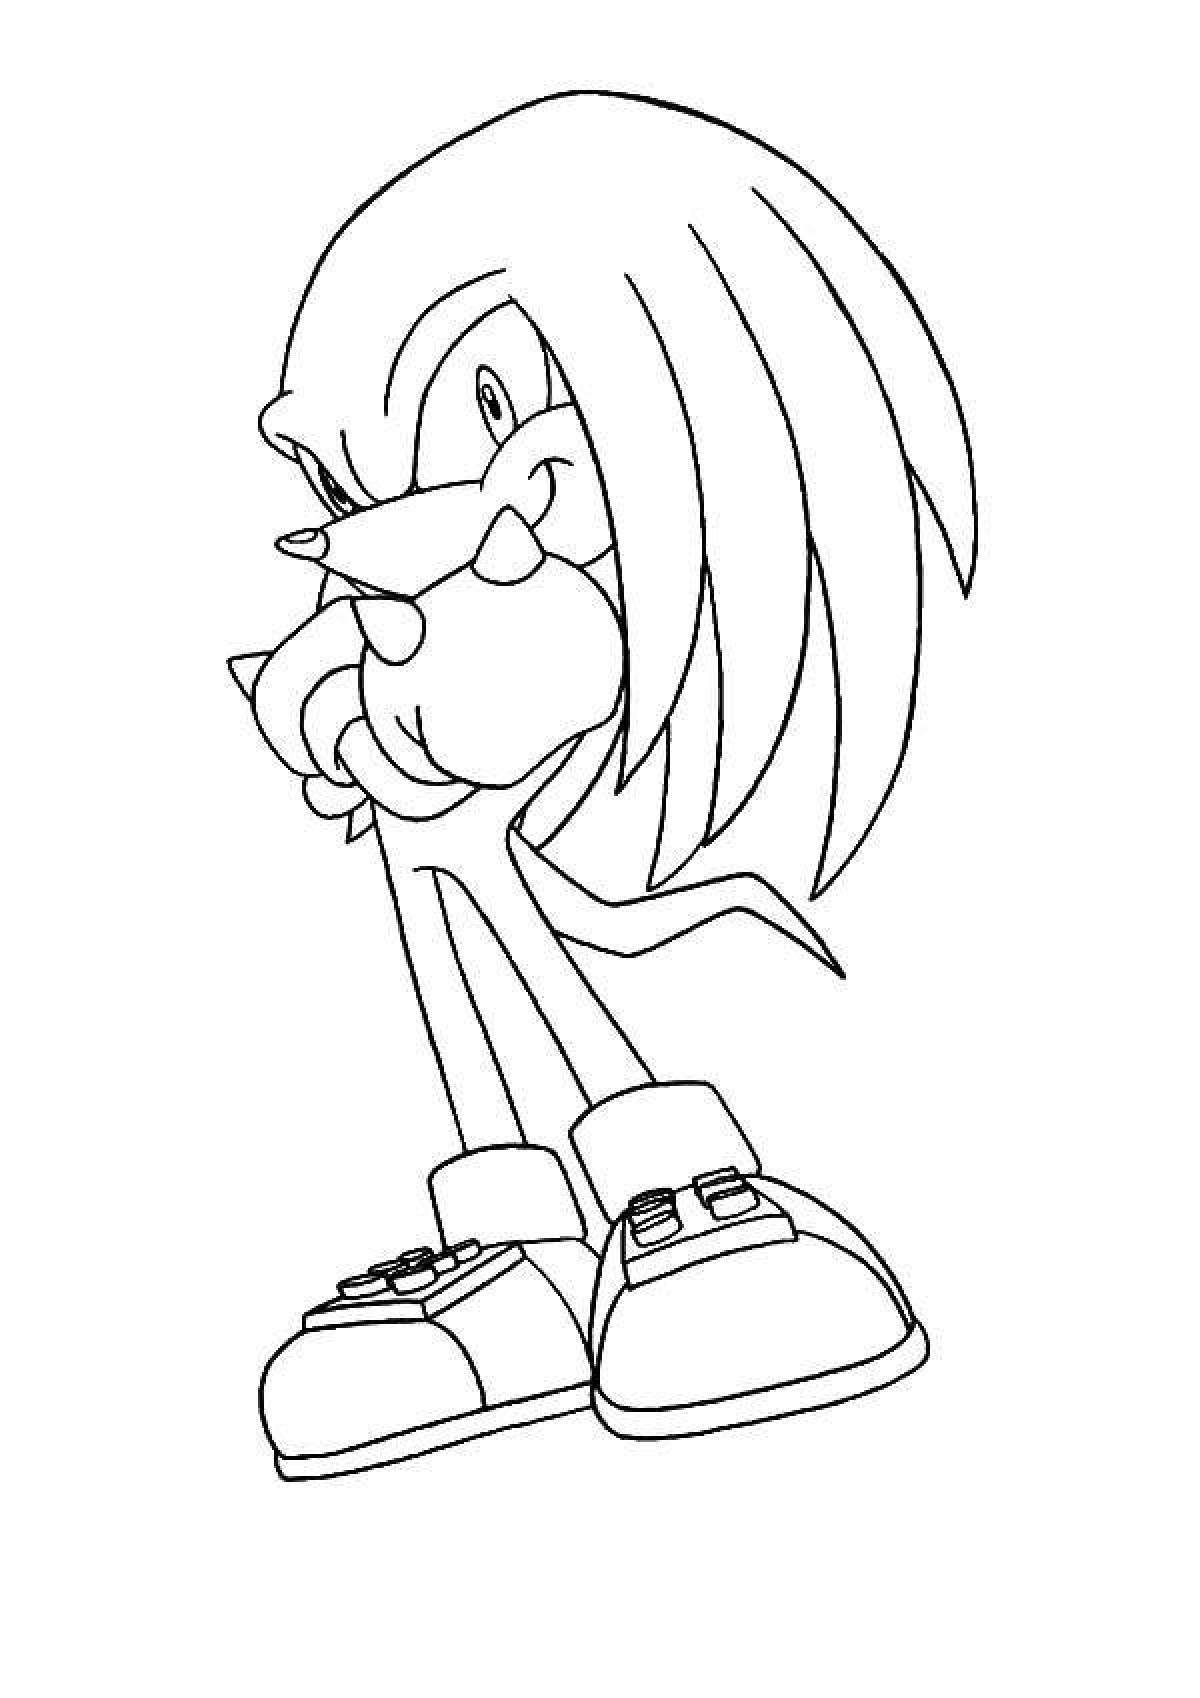 Attractive sonic knuckles coloring book